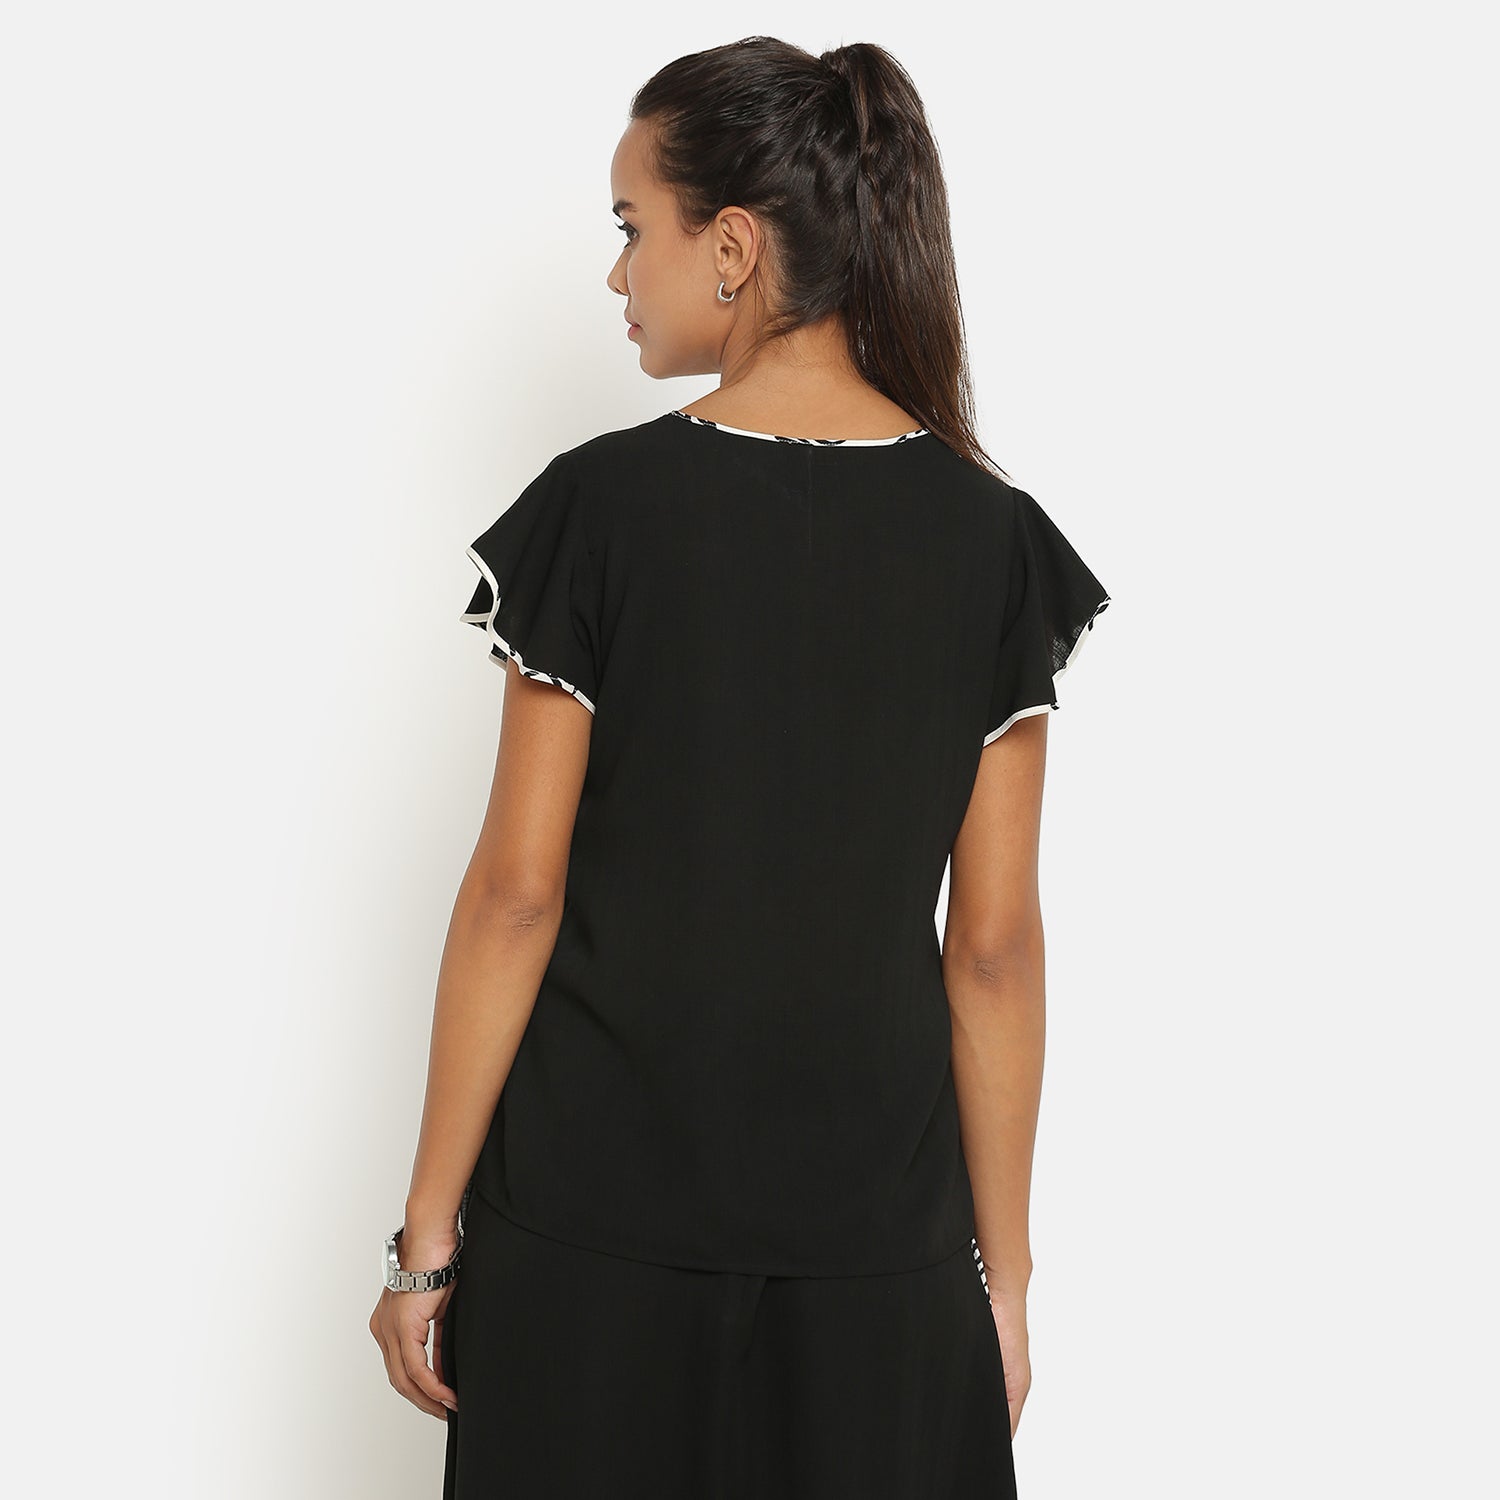 Black  Top With Frill on Side Seam With Contrast Pining